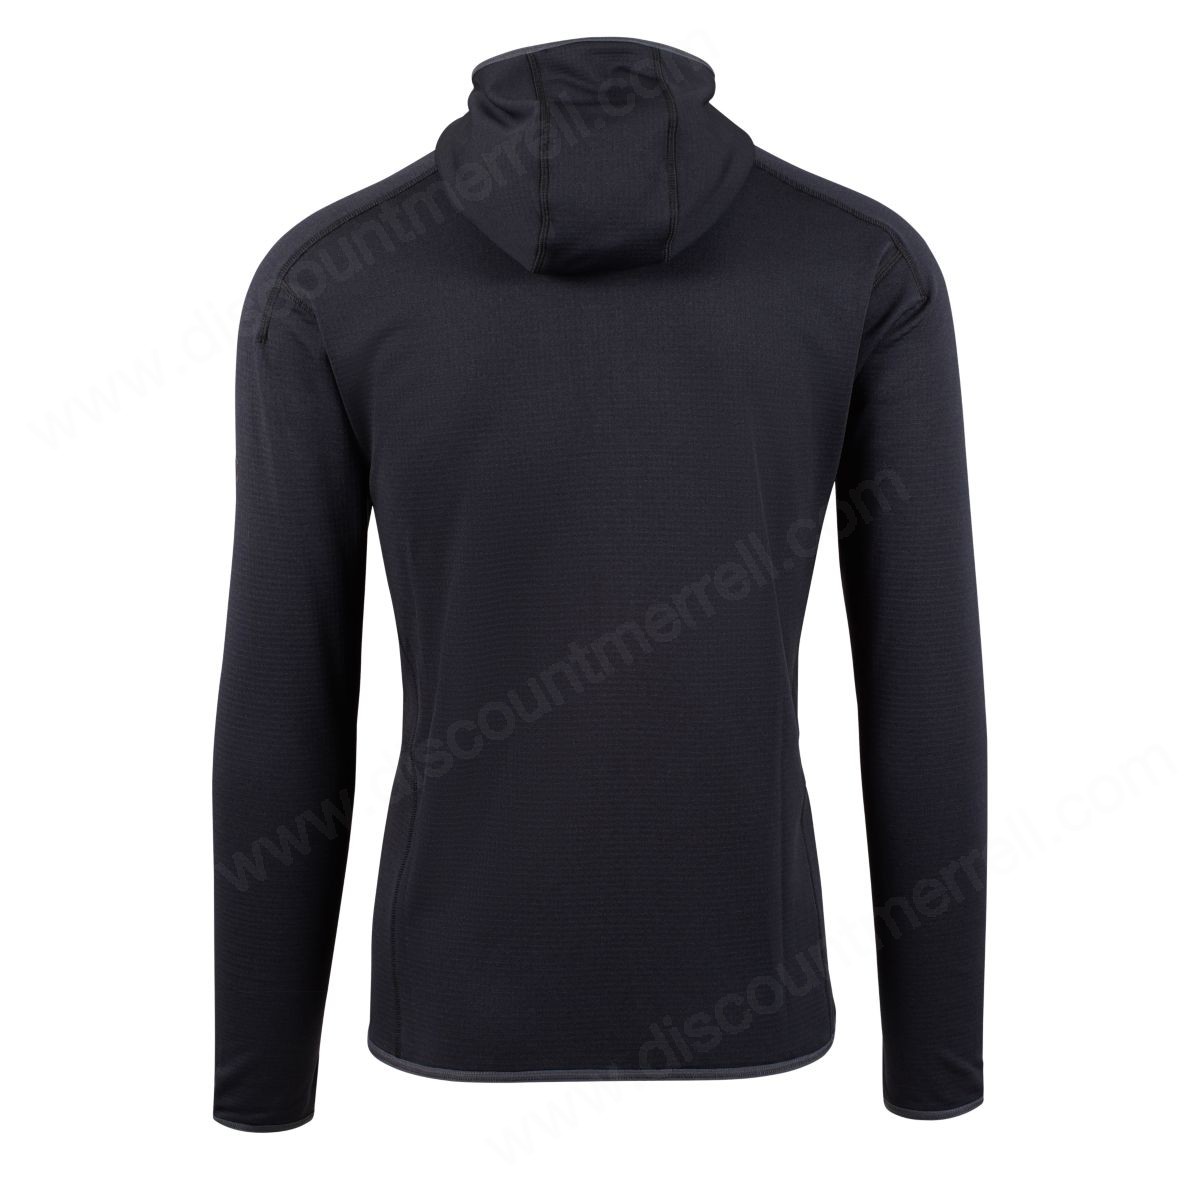 Merrell Mens's Midweight Long Sleeve Full Zip Mid-Layer With Drirelease® Fabric Black Heather - -1